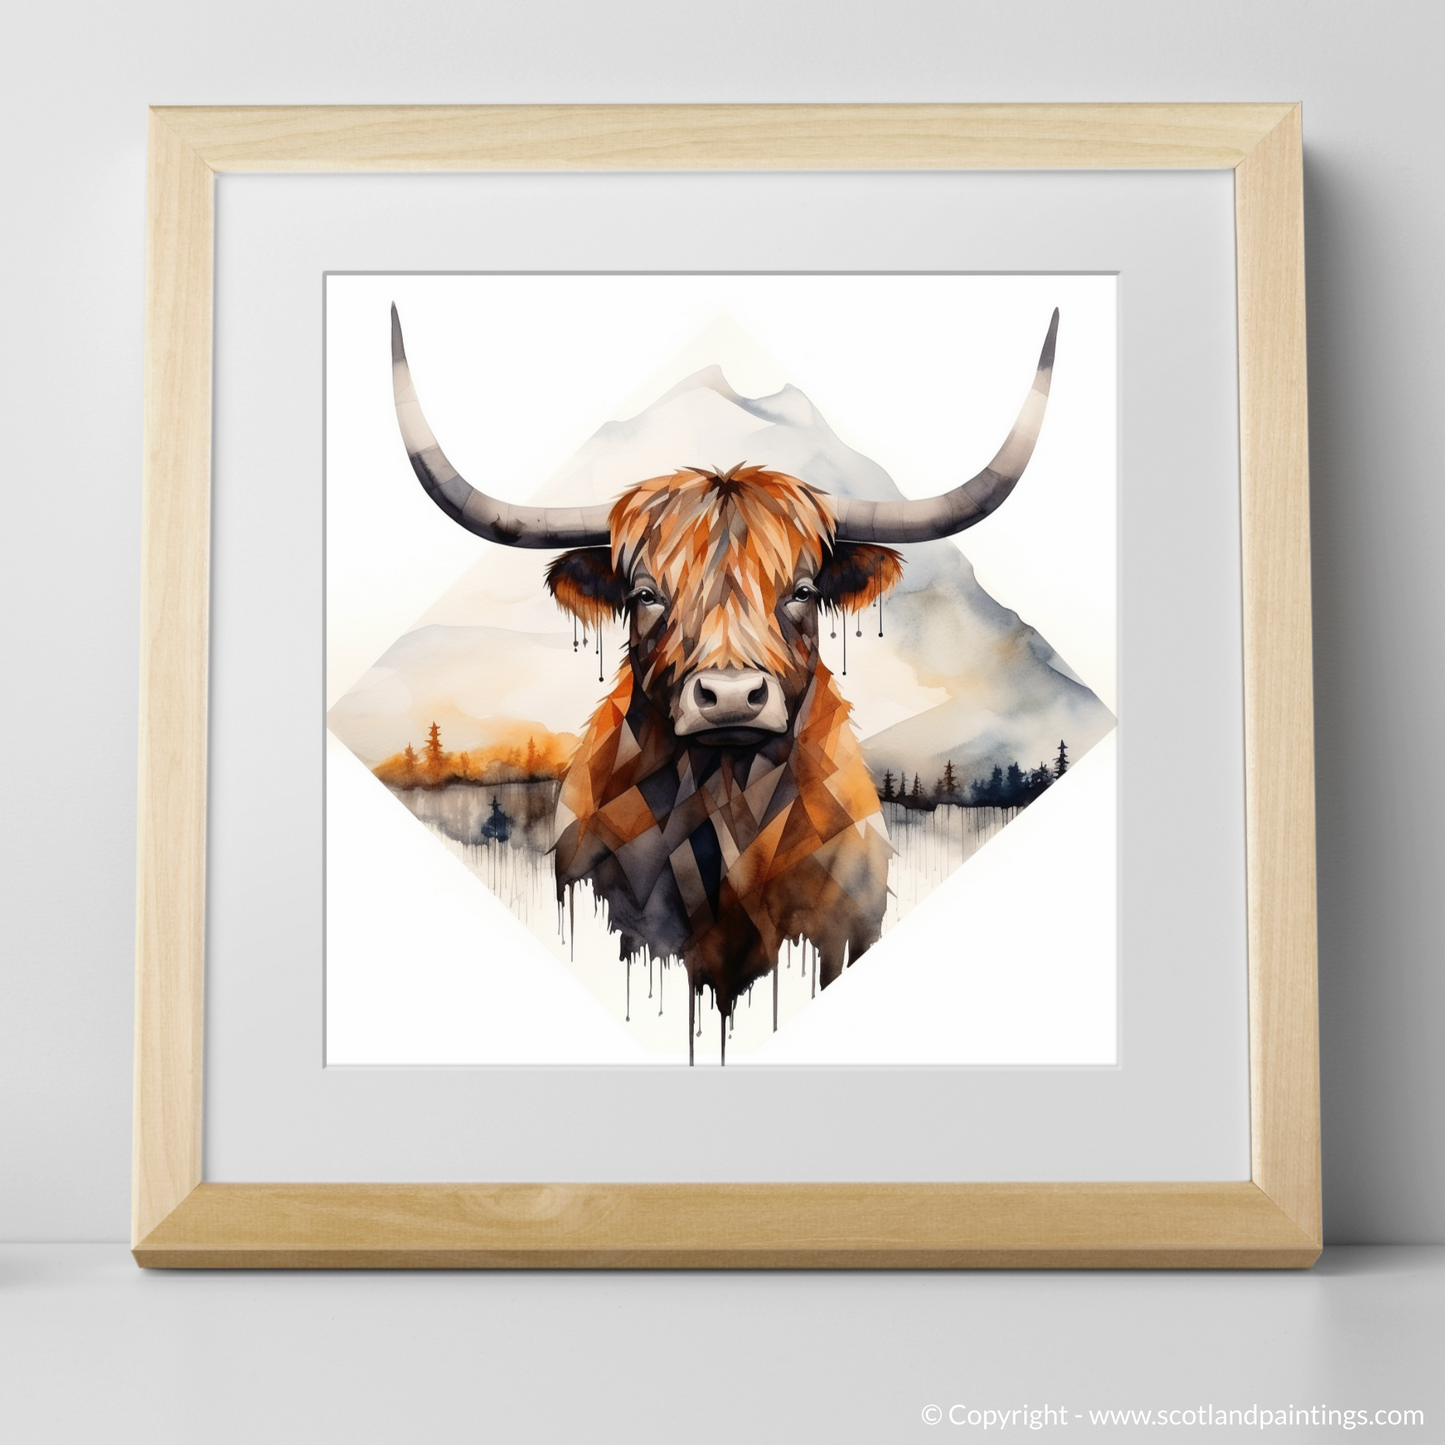 Highland Serenity: A Minimalist Tribute to Scotland's Iconic Cow